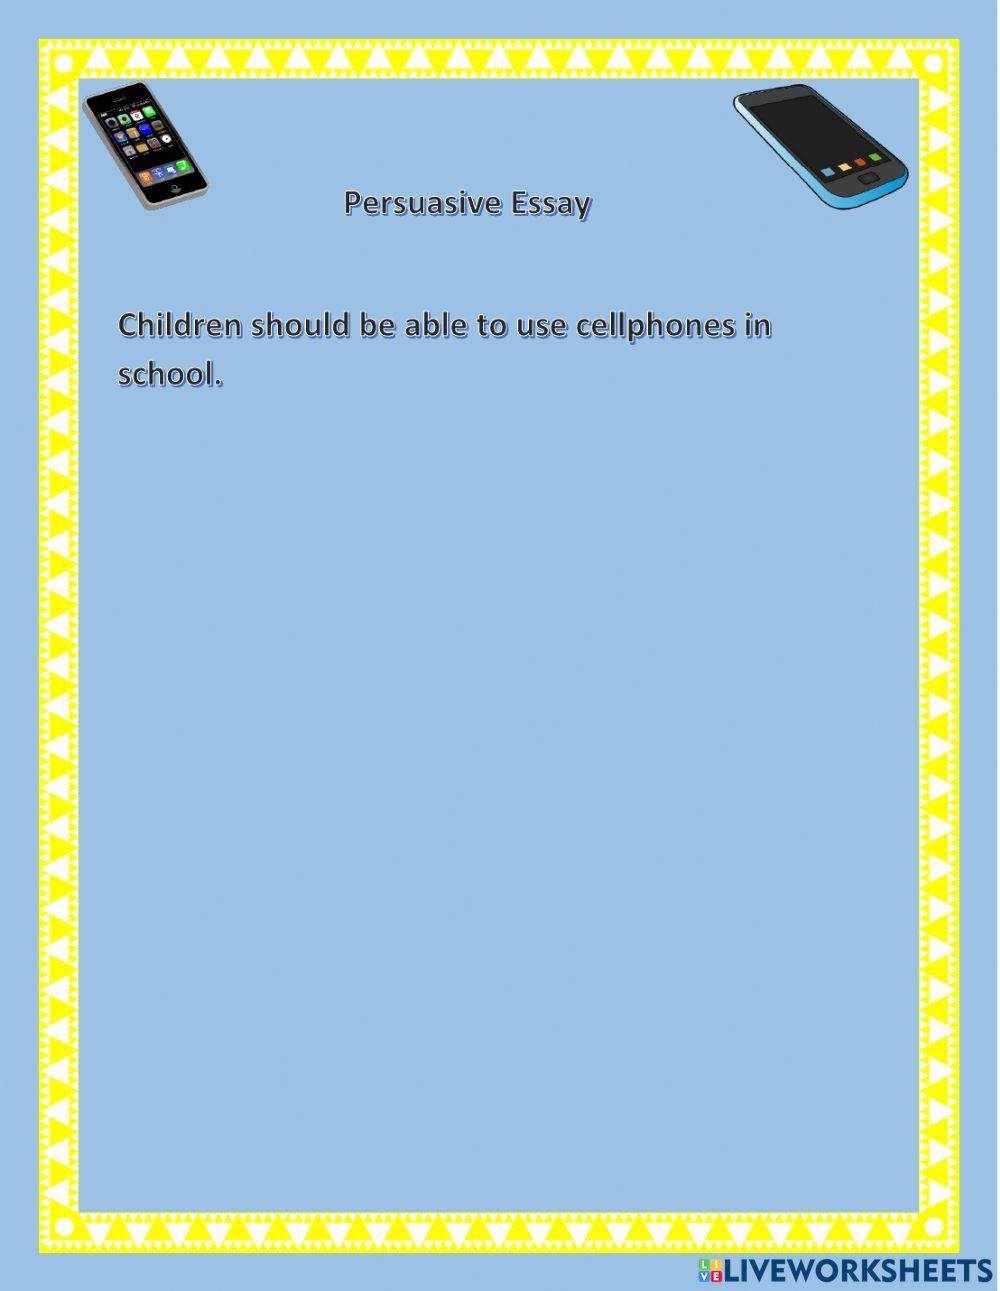 Cellphones in the classroom